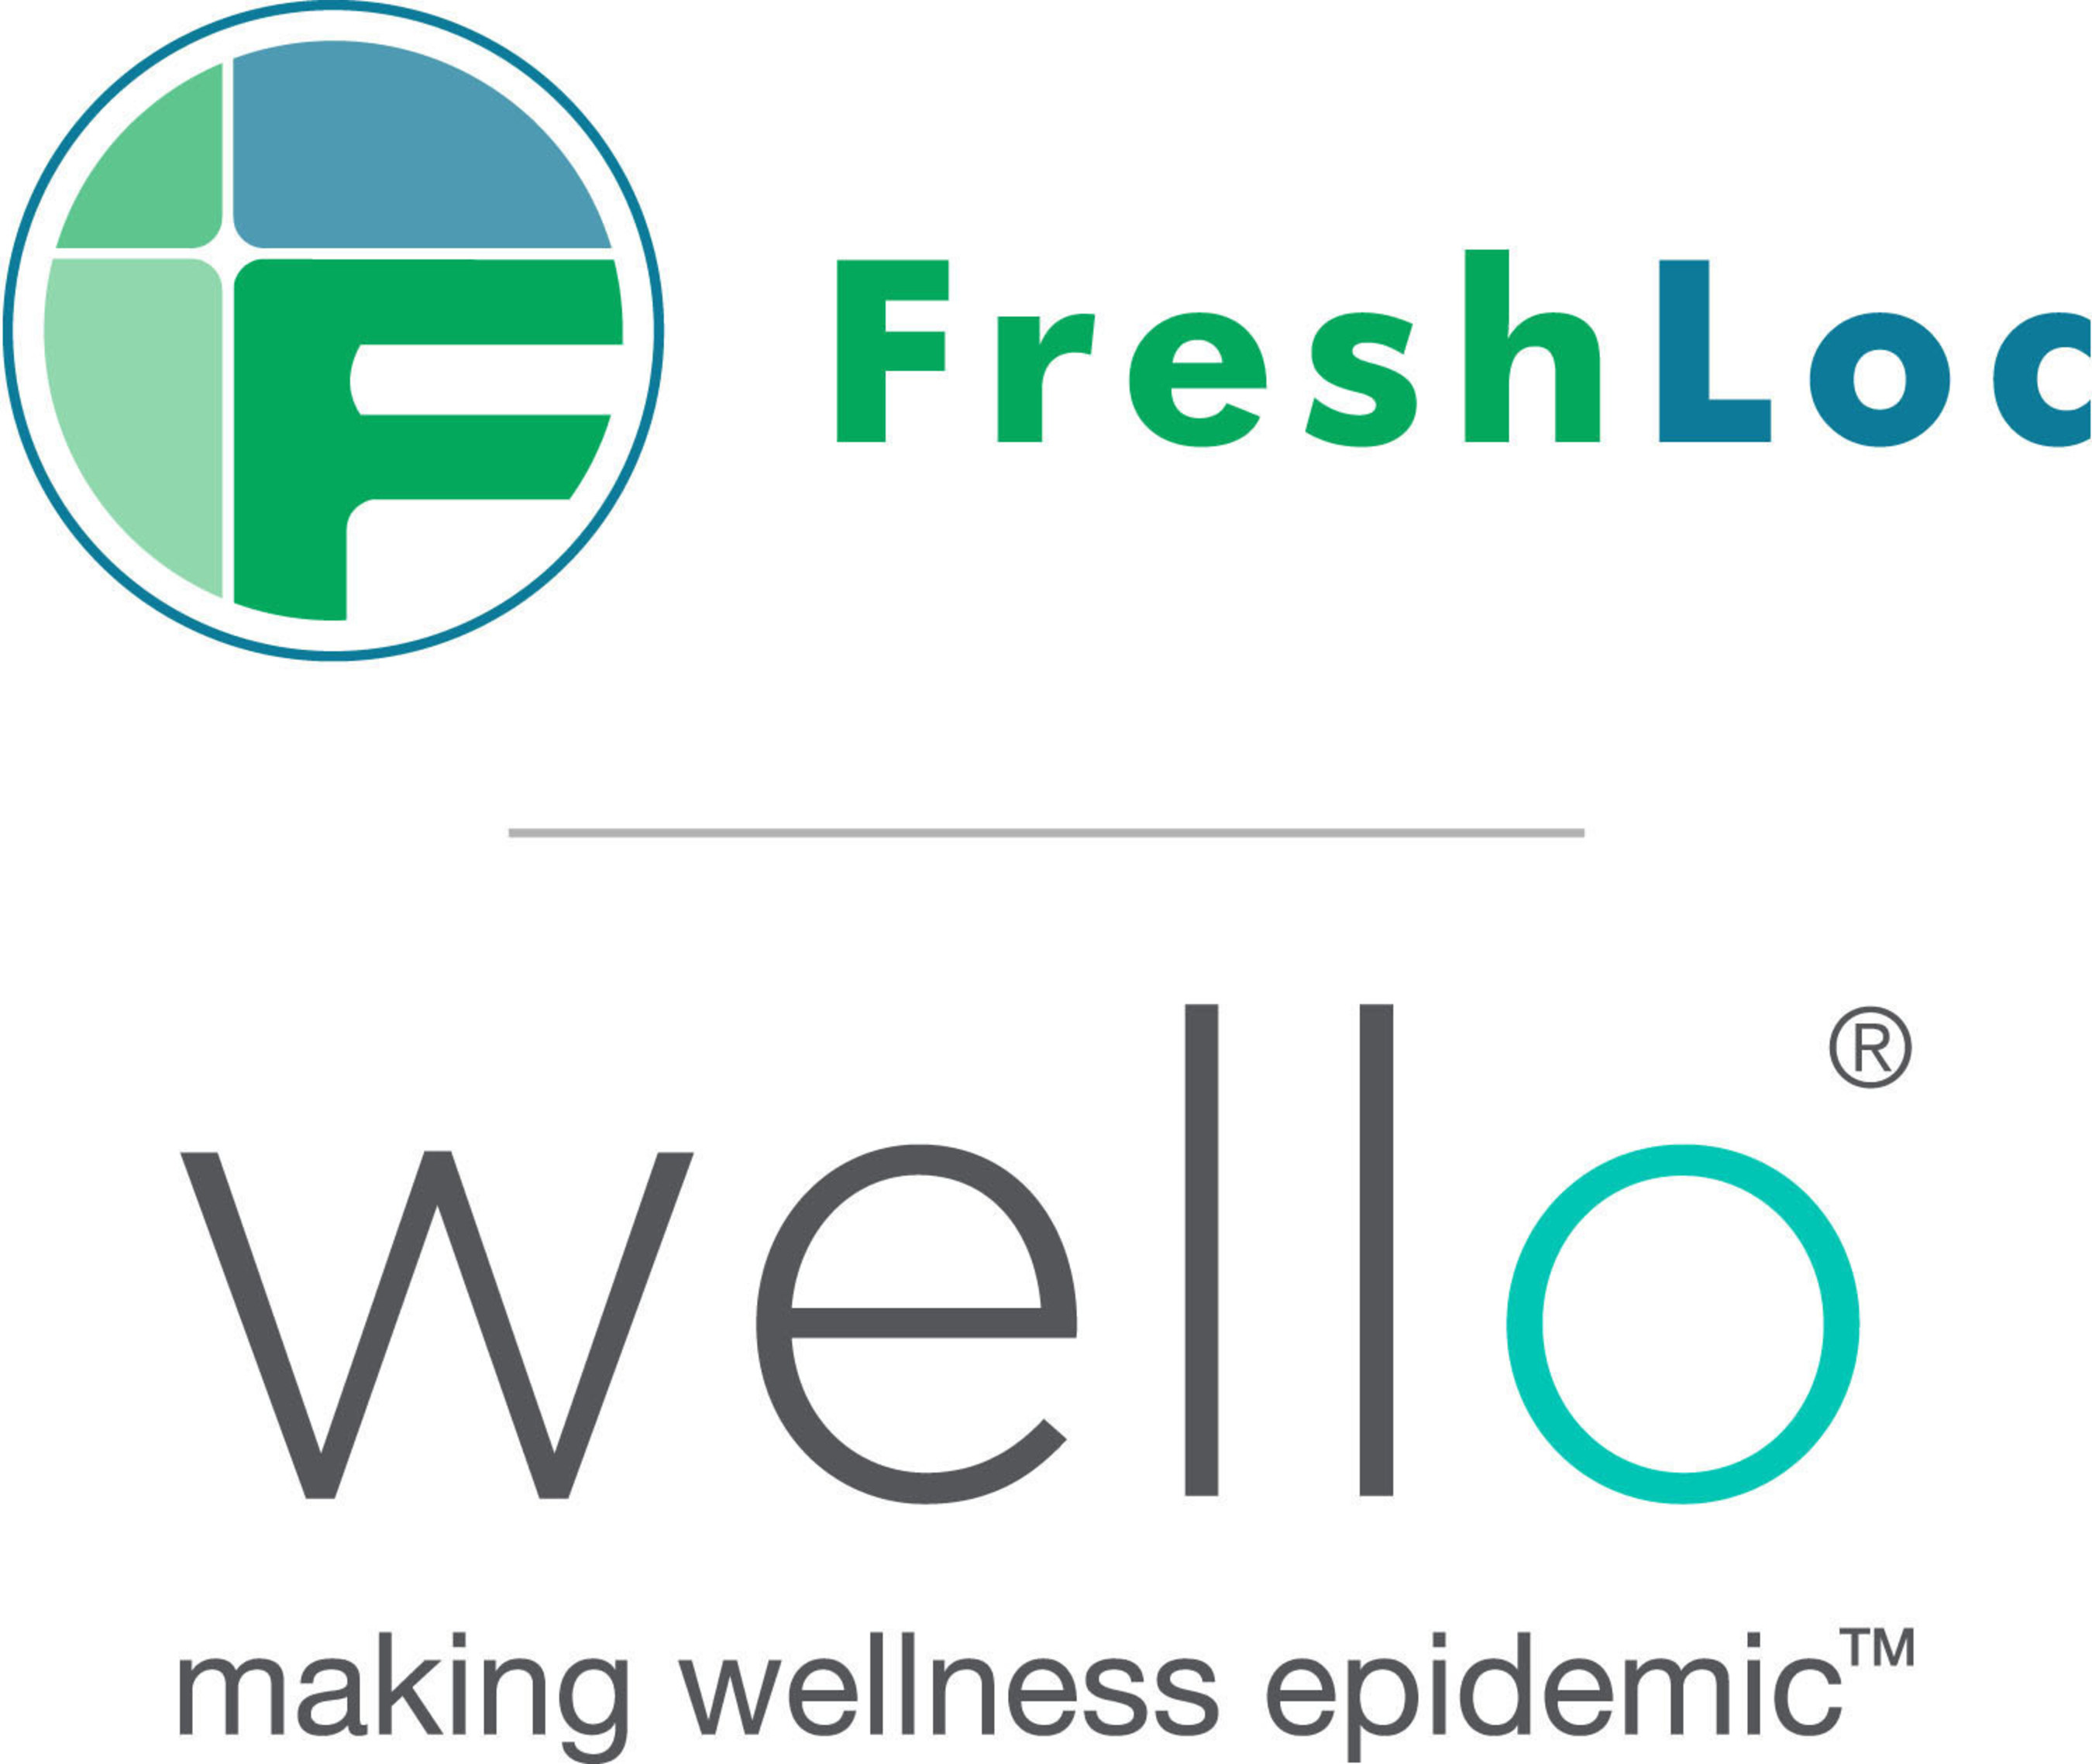 FreshLoc and Wello Logo for FreshLoc Technologies and its wholly owned subsidiary, Wello Inc., making wellness epidemic, always innovating. See freshloc.com and welloinc.com. 3939 Belt Line Road, Suite 400, Addison, TX, 75001; Phone: 972-759-0111 OR 888-225-9458